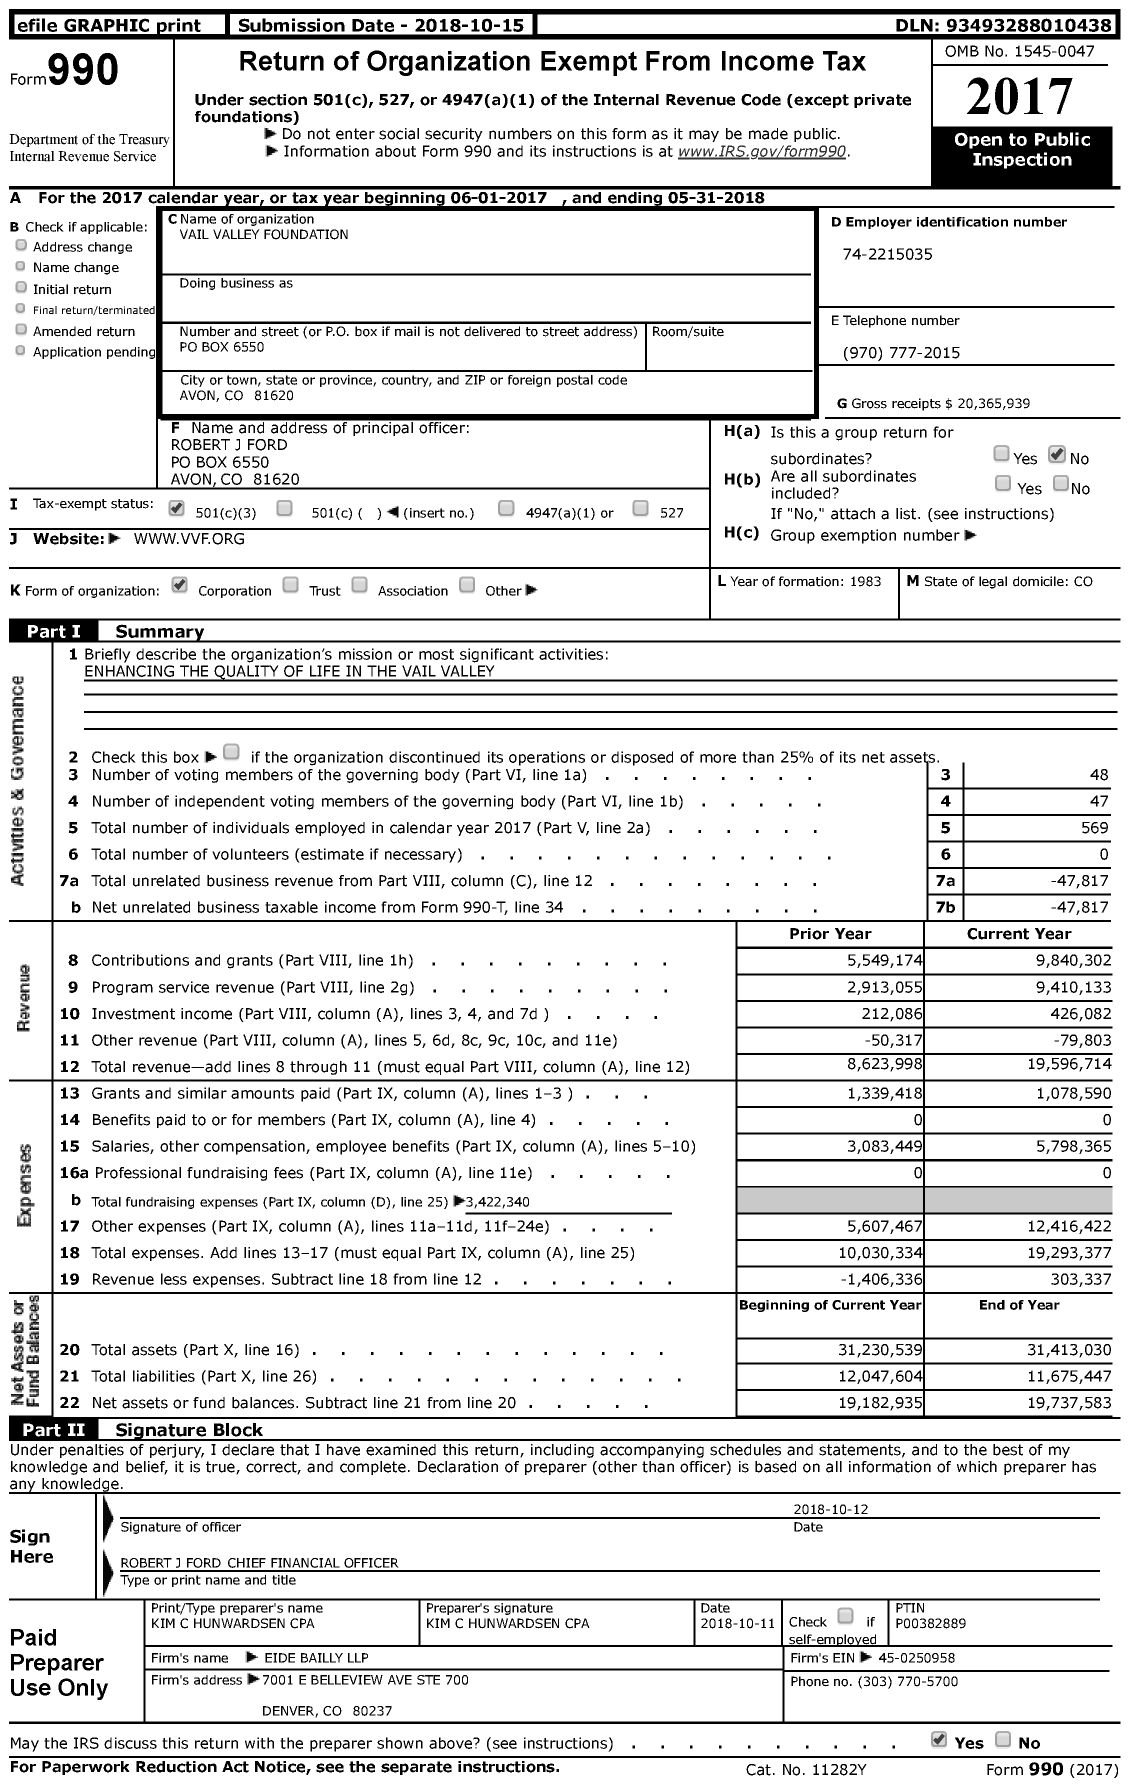 Image of first page of 2017 Form 990 for Vail Valley Foundation (VVF)